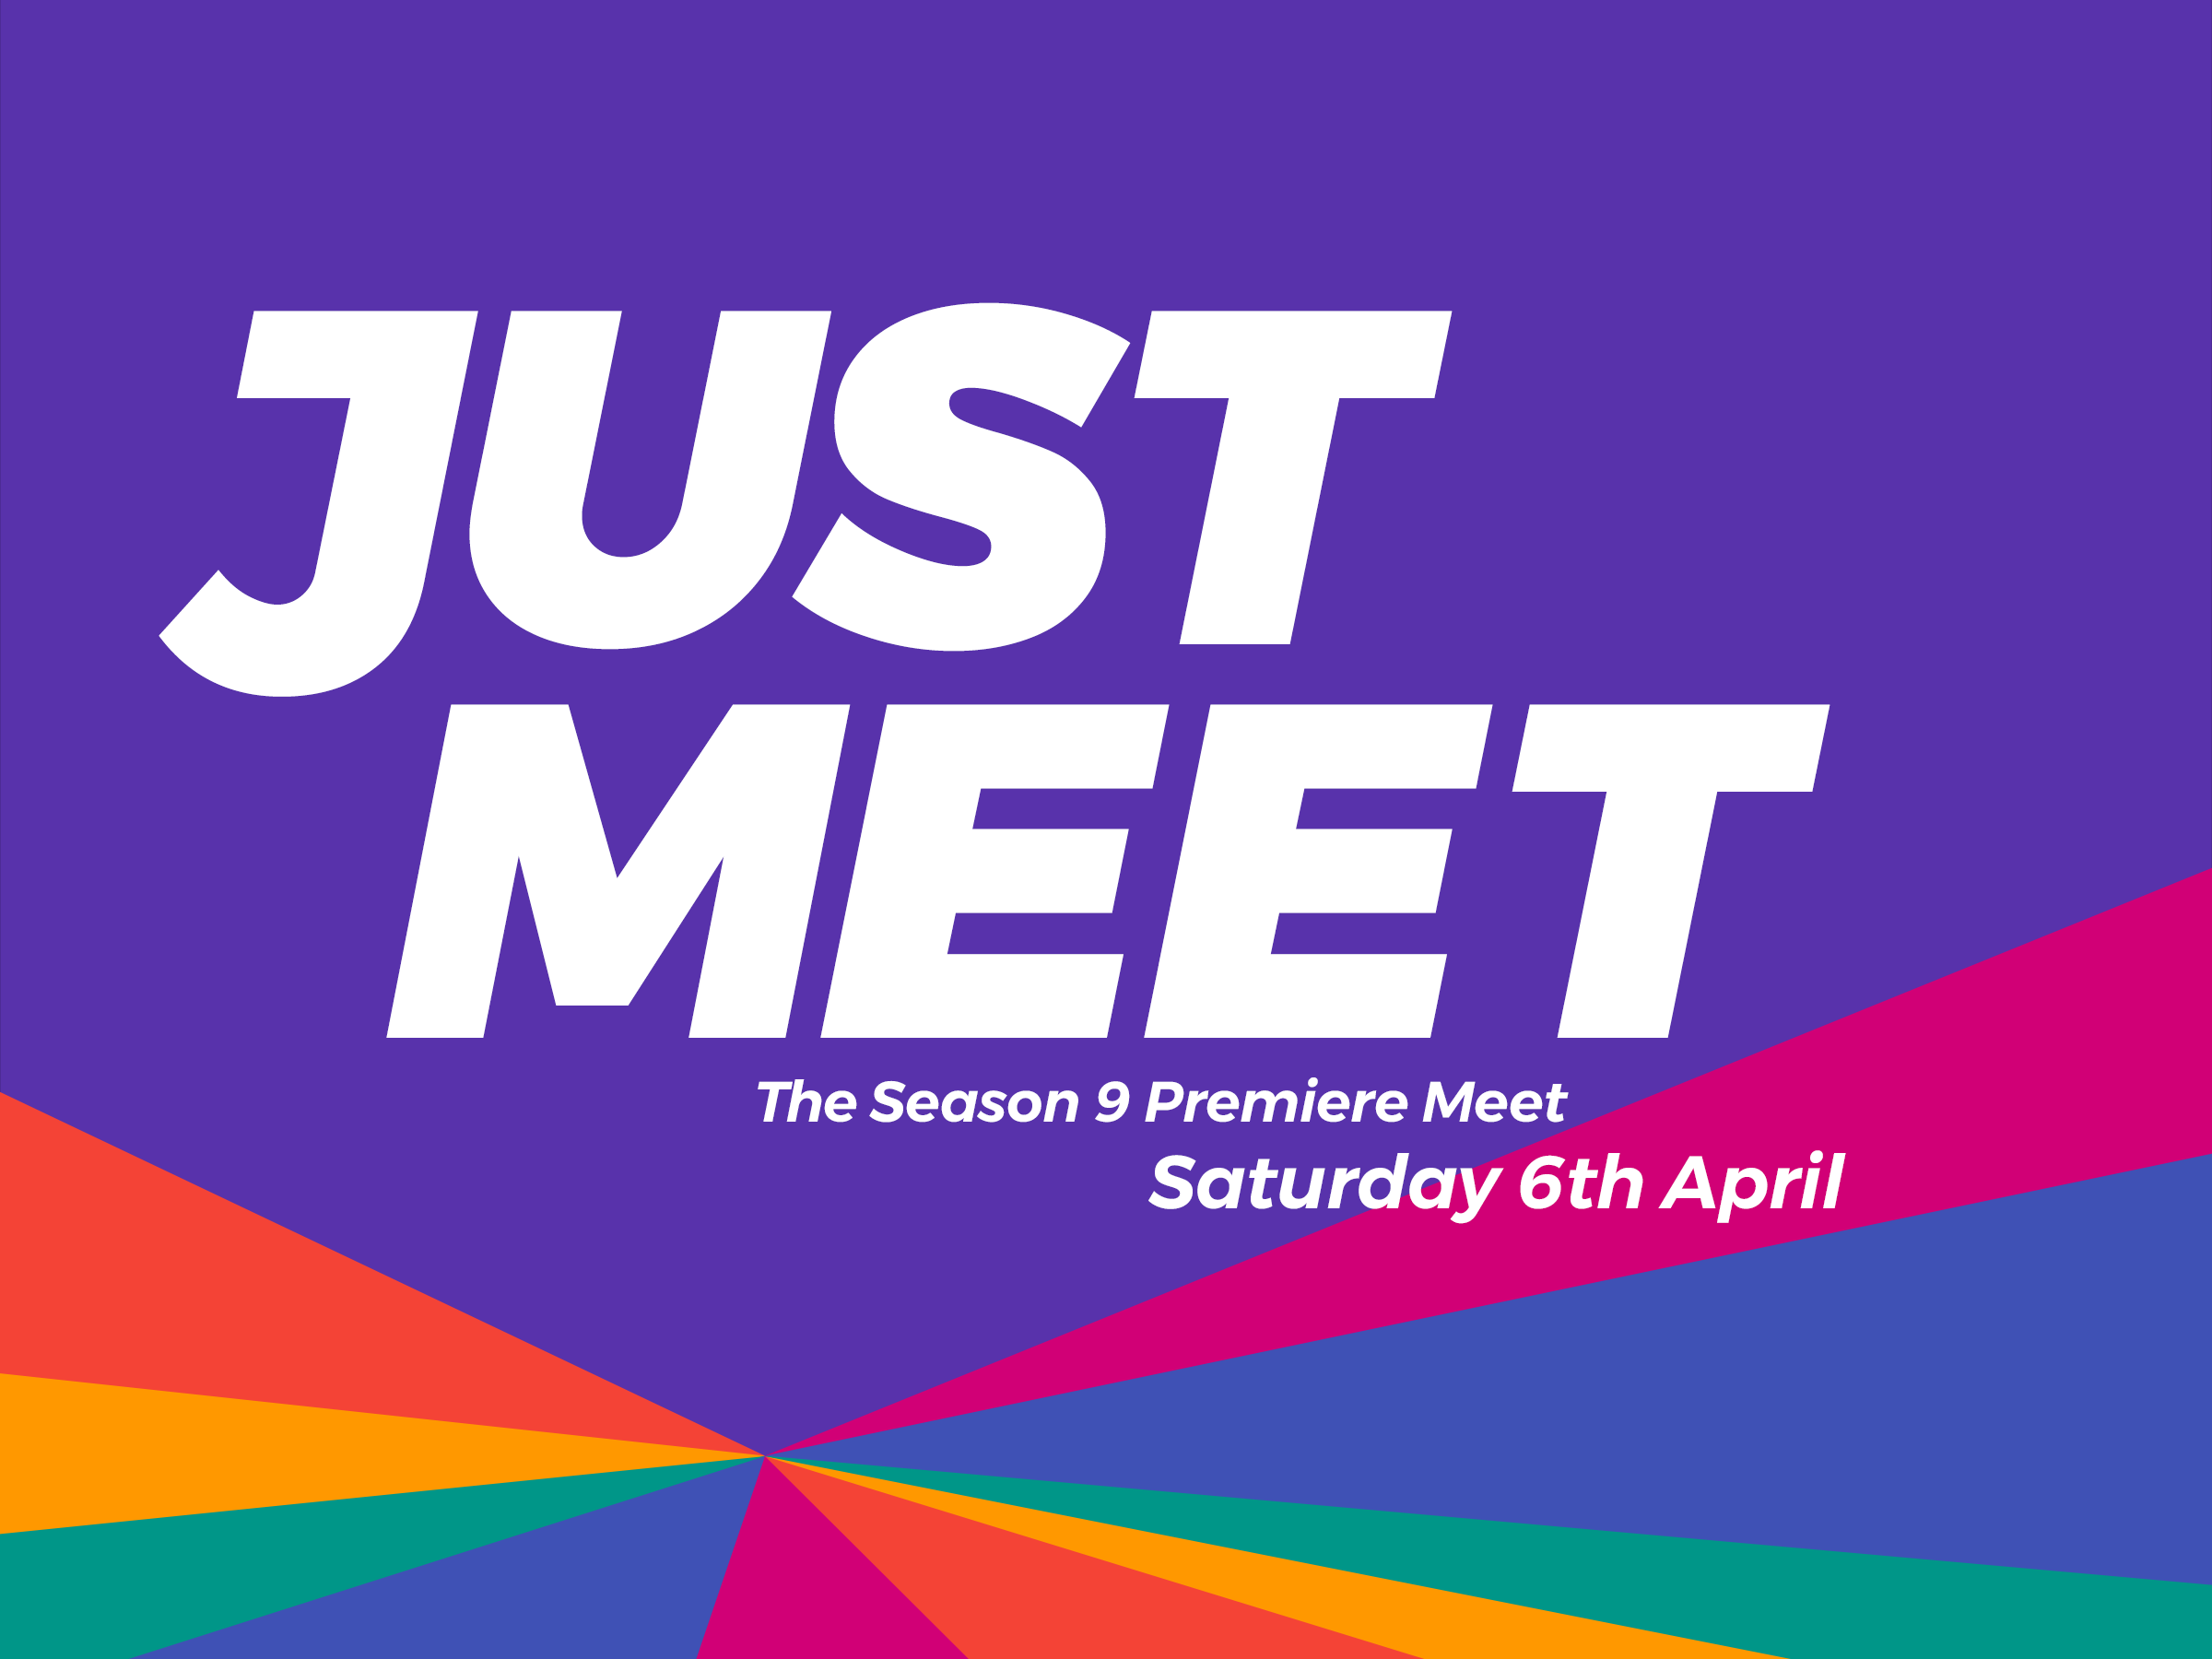 An image saying "Just Meet. The Season 9 Premiere Meet. Saturday 6th April." on a purple background with a rainbow sunburst.